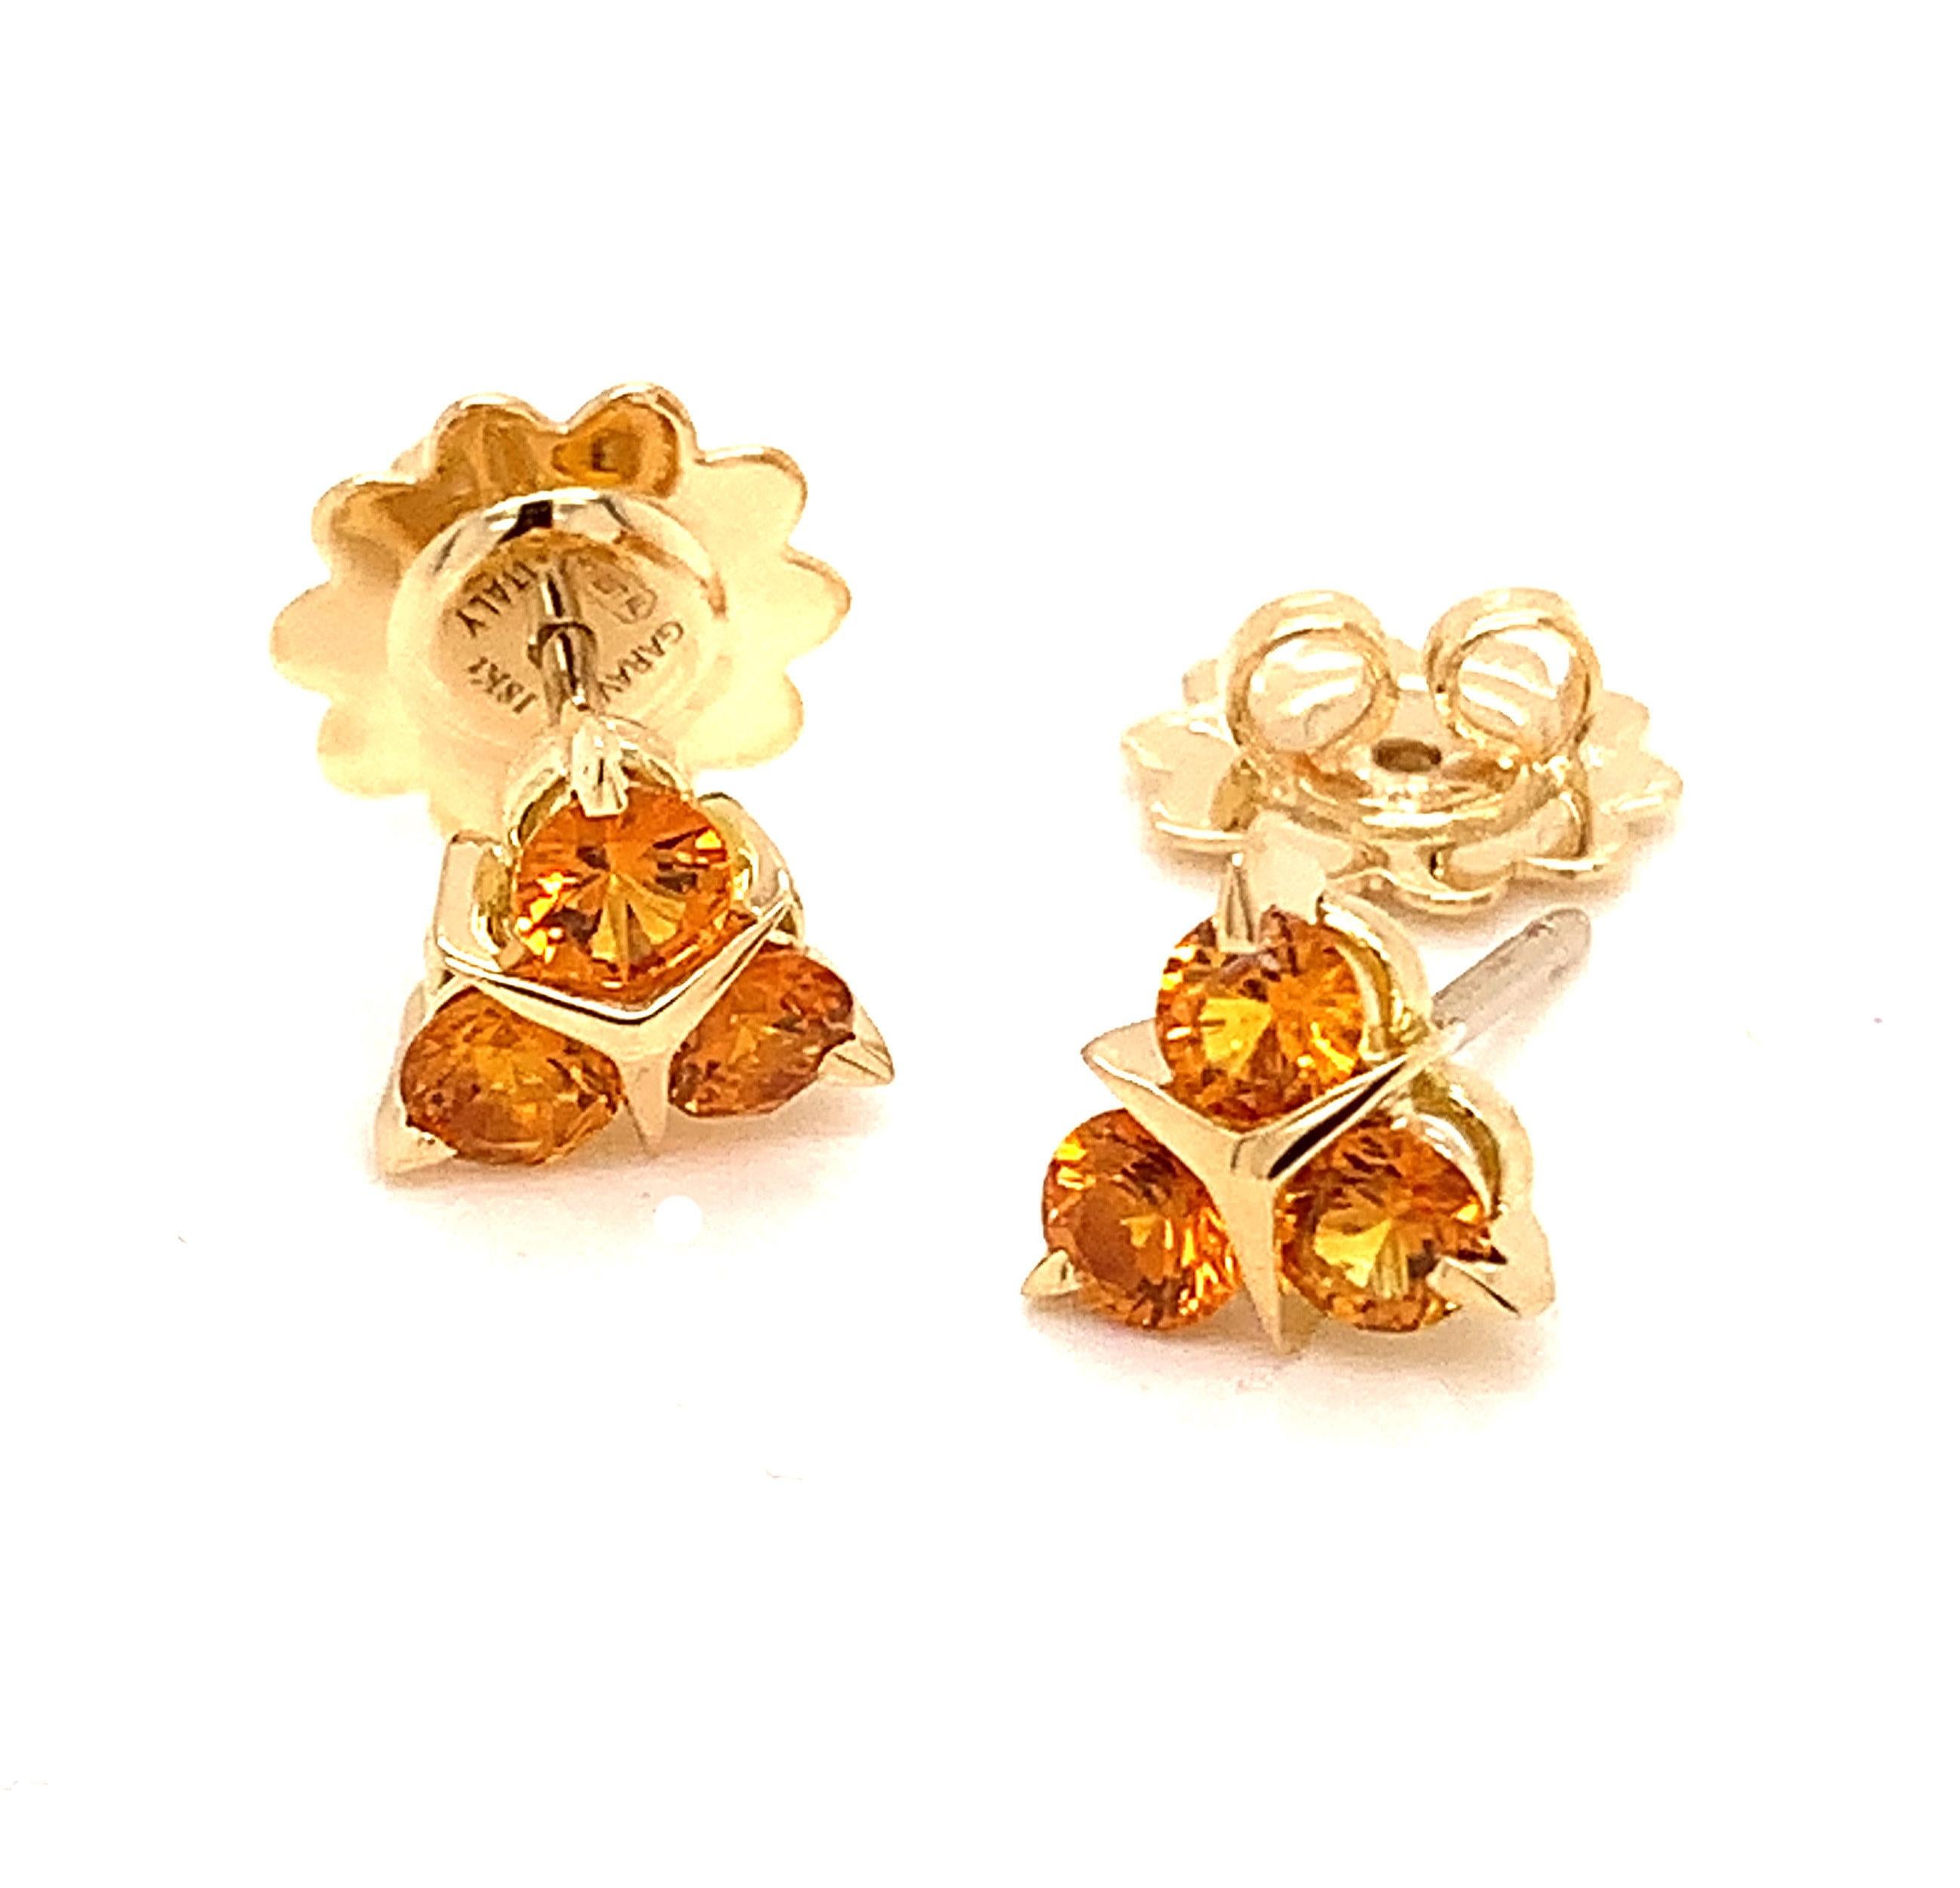 Garavelli earrings in  very unique and pretty design, in white gold 18 kt with six perfect round yellow sapphires to a total carat weight of 1.12
 Available also in diamonds, emeralds, sapphires, rubies. Matching pendant available.
GOLD grs : 3,00
